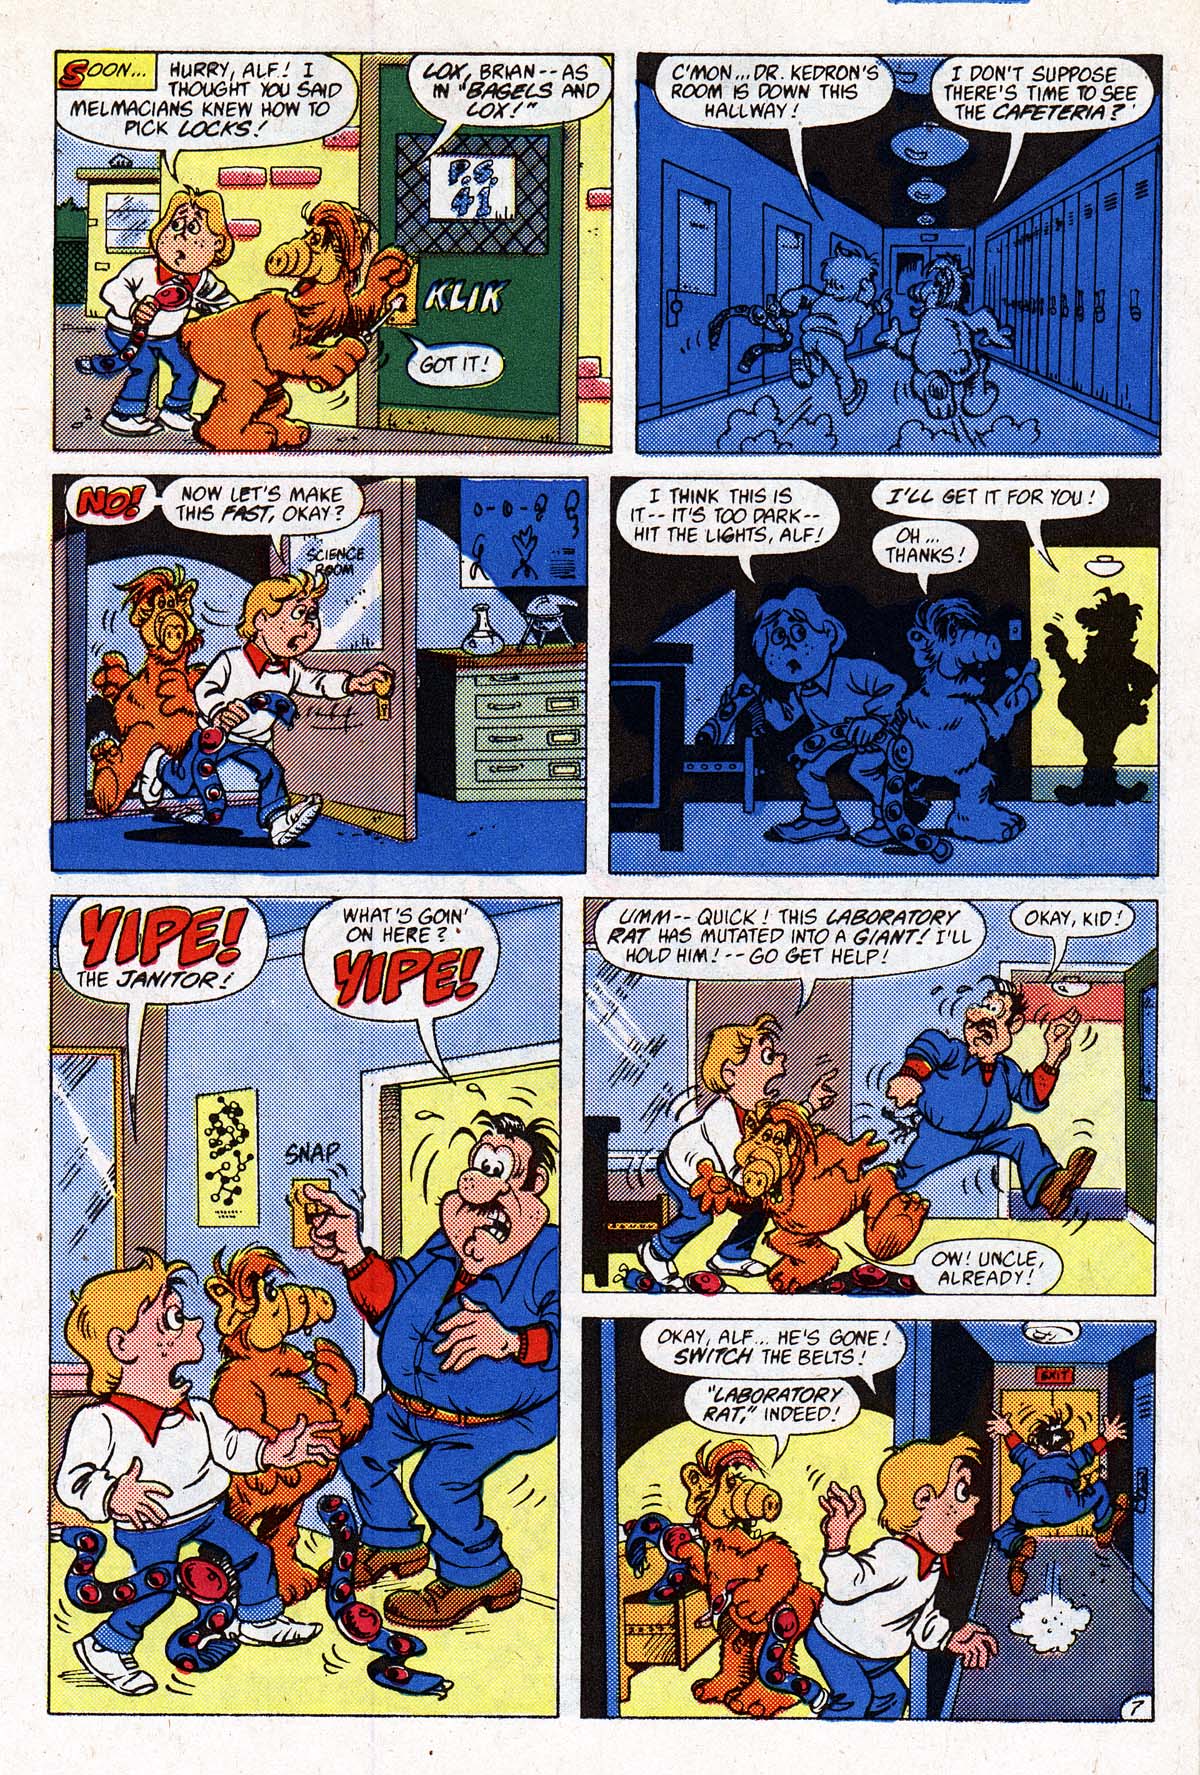 Read online ALF comic -  Issue #2 - 75